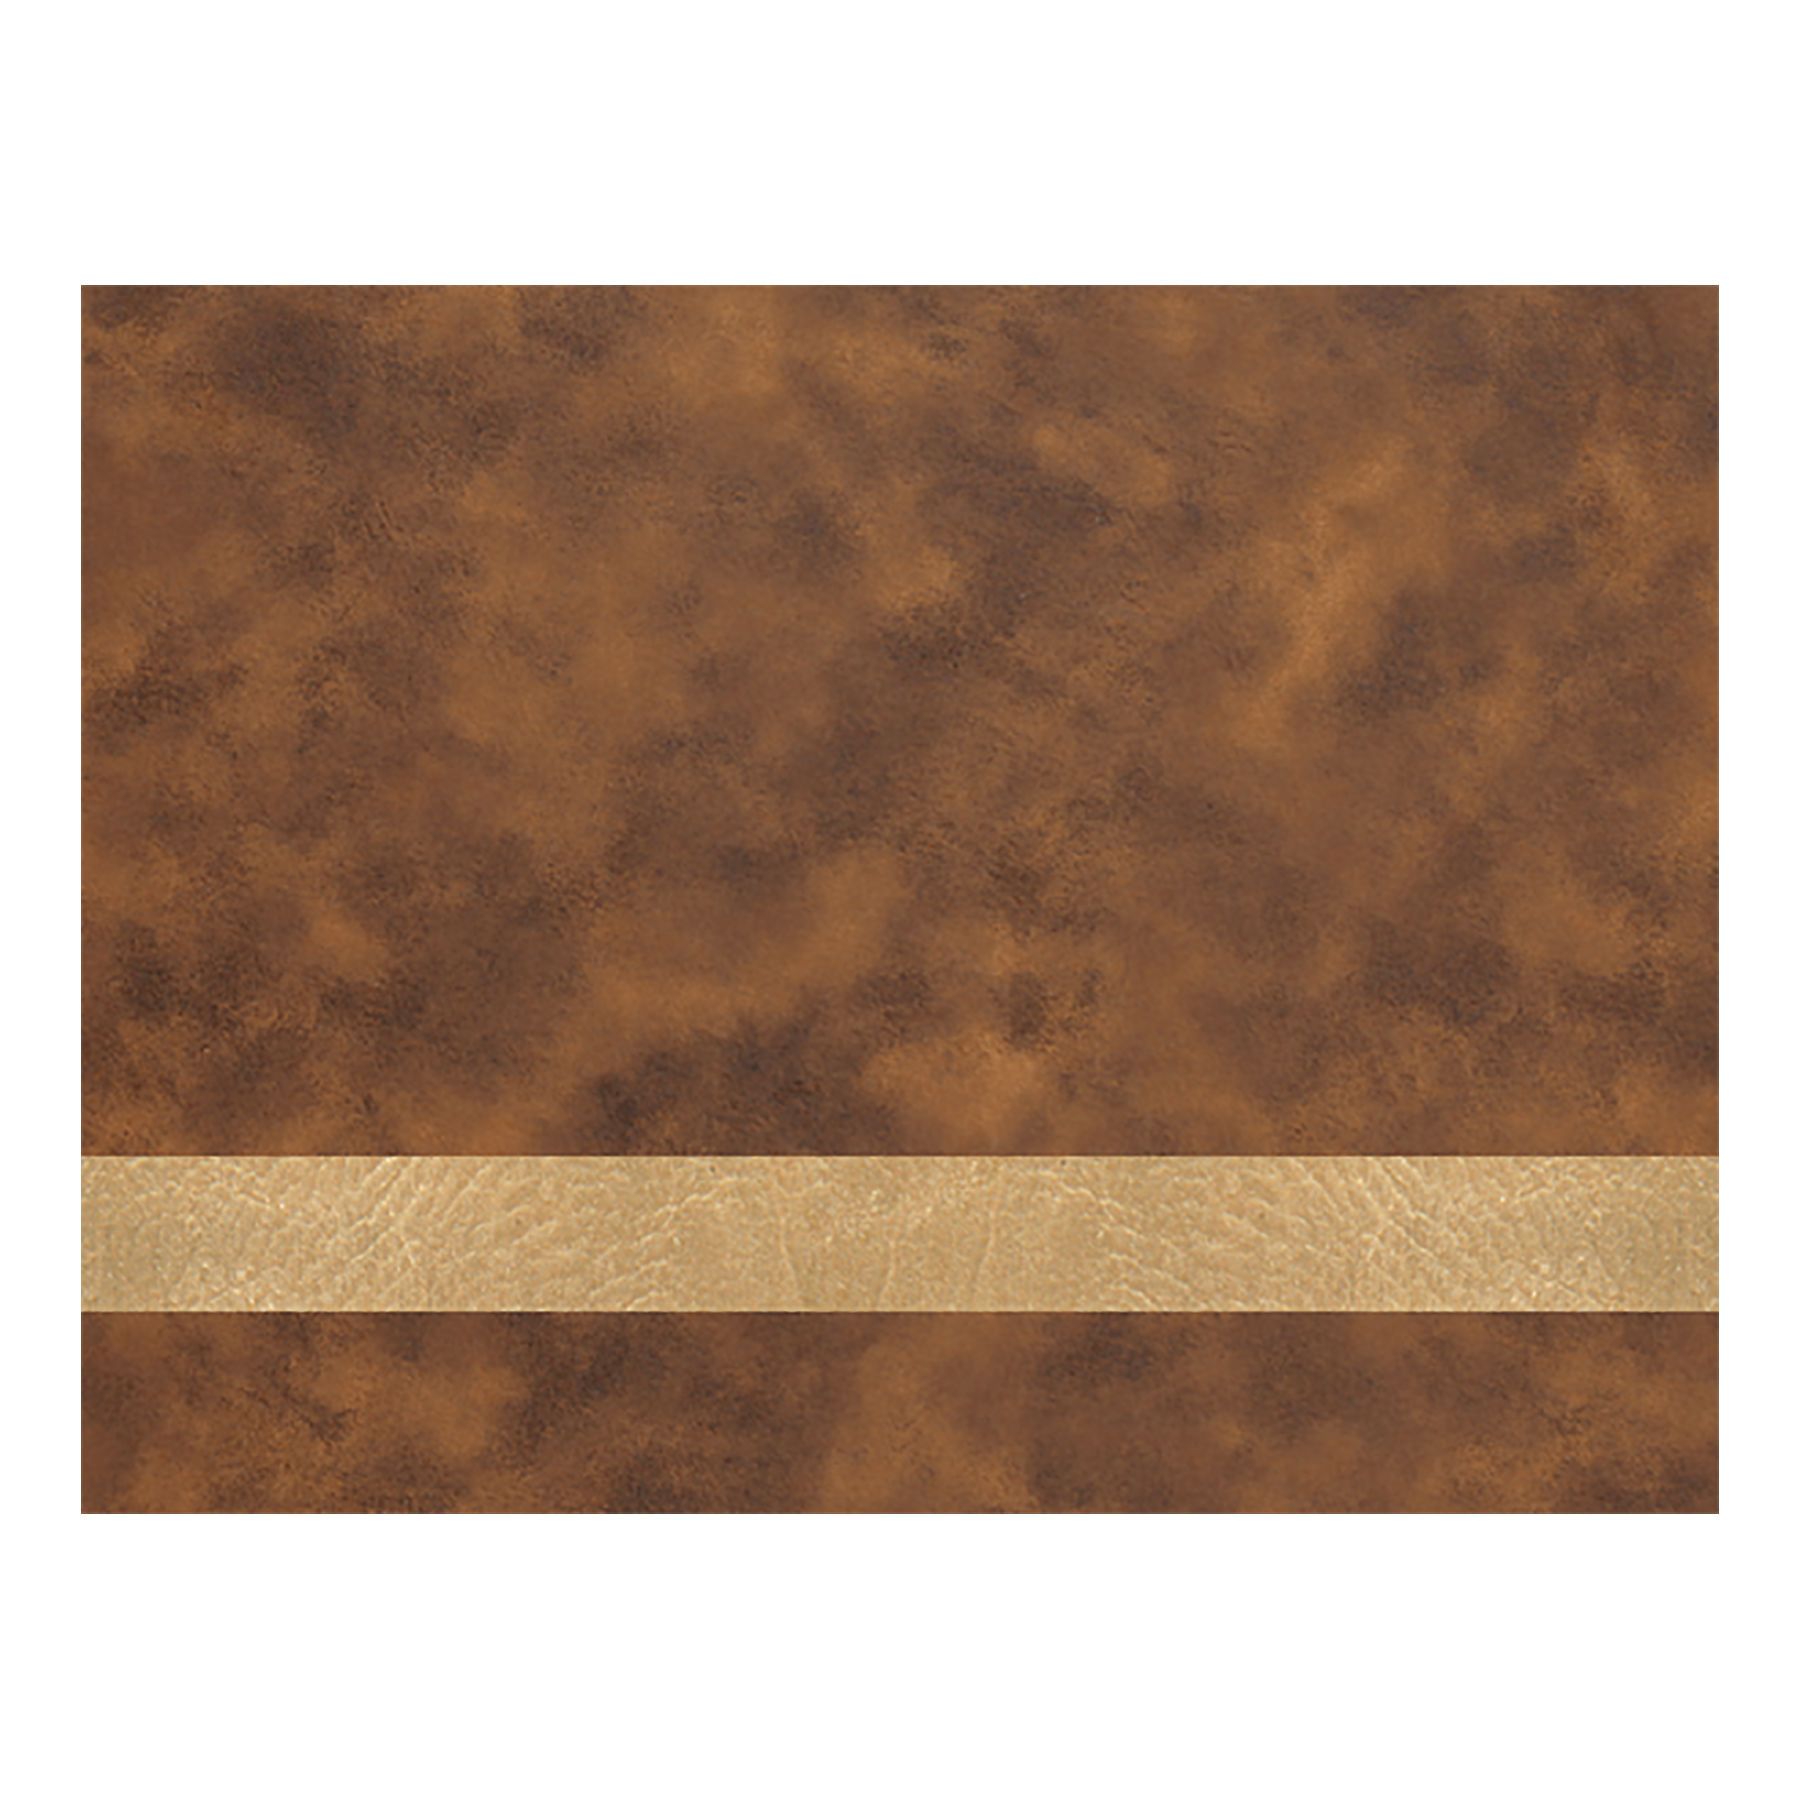 PRE-ORDER! Full Size Laserable Leatherette Sheet Stock, Omtech Laser Engravers (Available Jan. 2022) Engraving Supplies Craftworks NW 24x16 (24" x 16") Rustic/Gold 